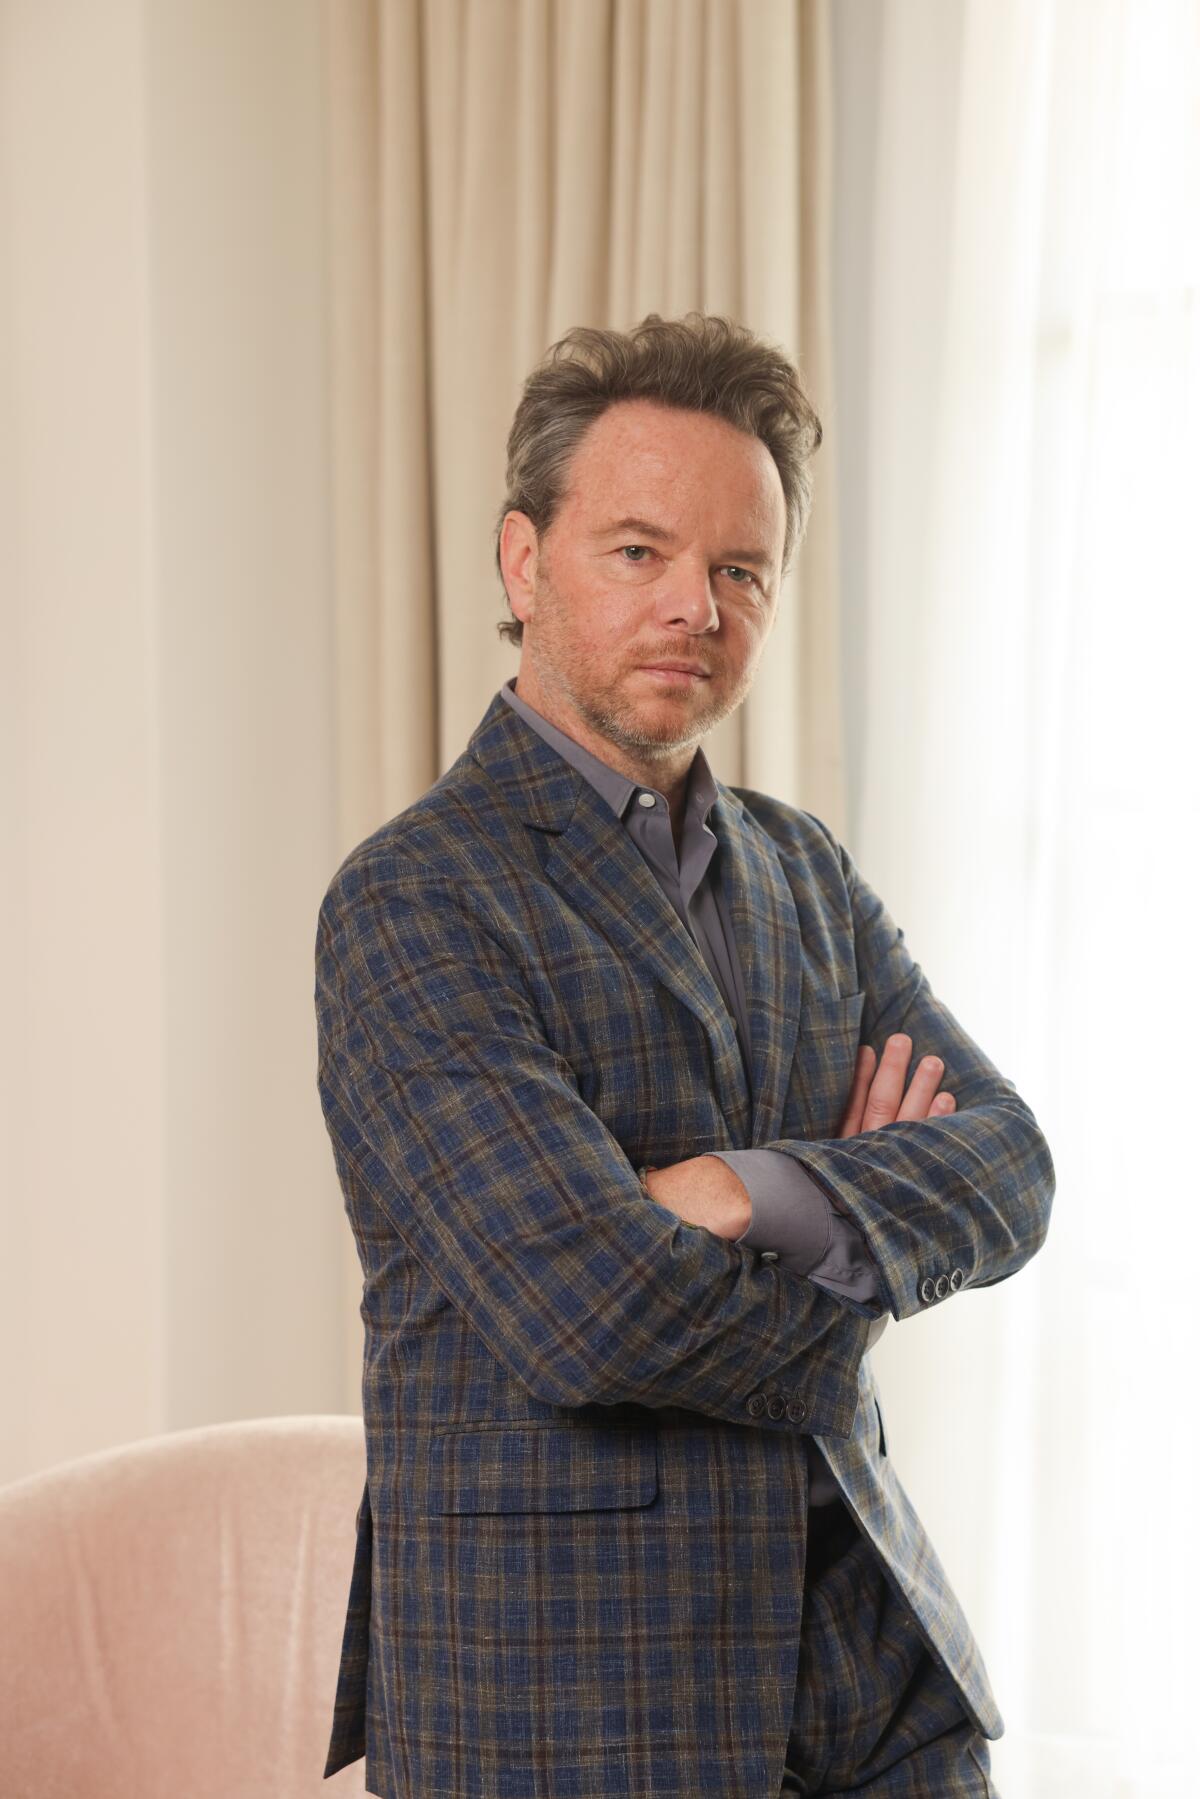 "Fargo" creator and showrunner Noah Hawley stands next to a draped window, arms crossed.